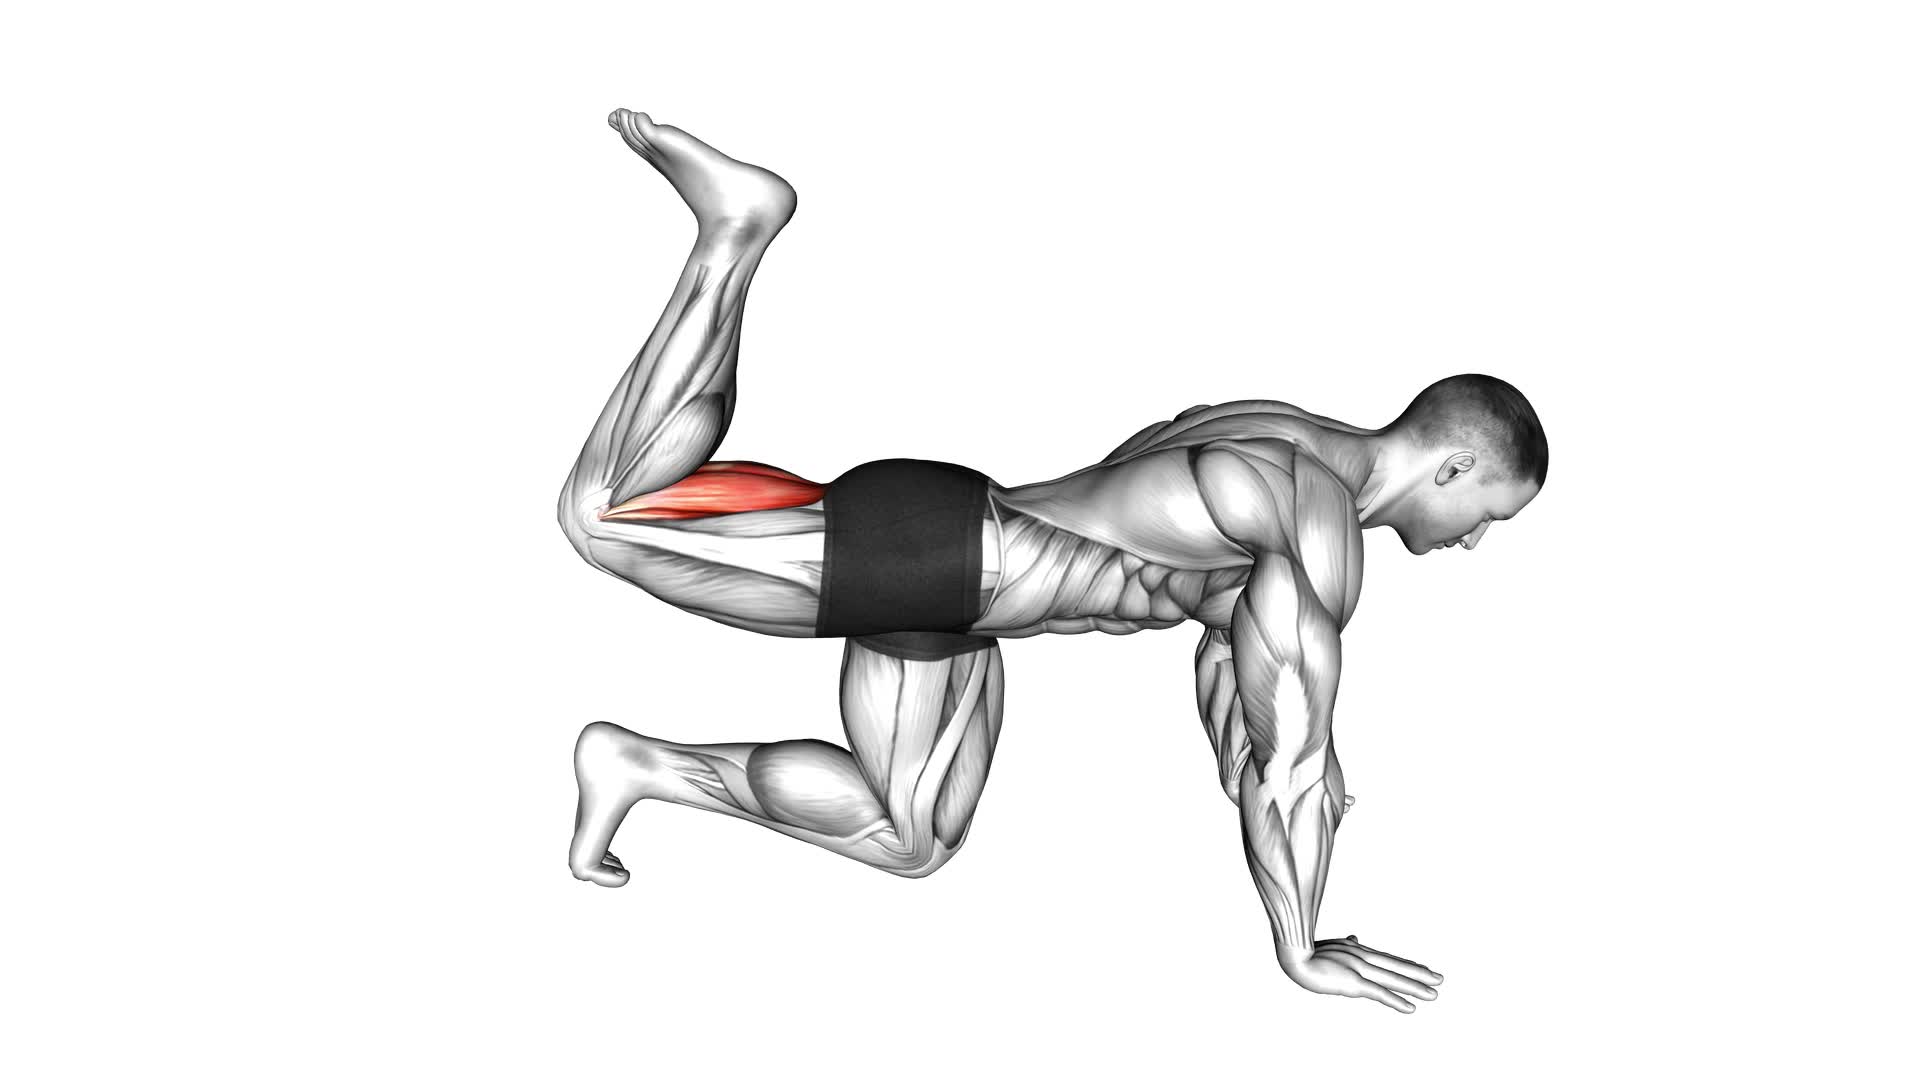 Quadruped Leg Curl - Video Exercise Guide & Tips